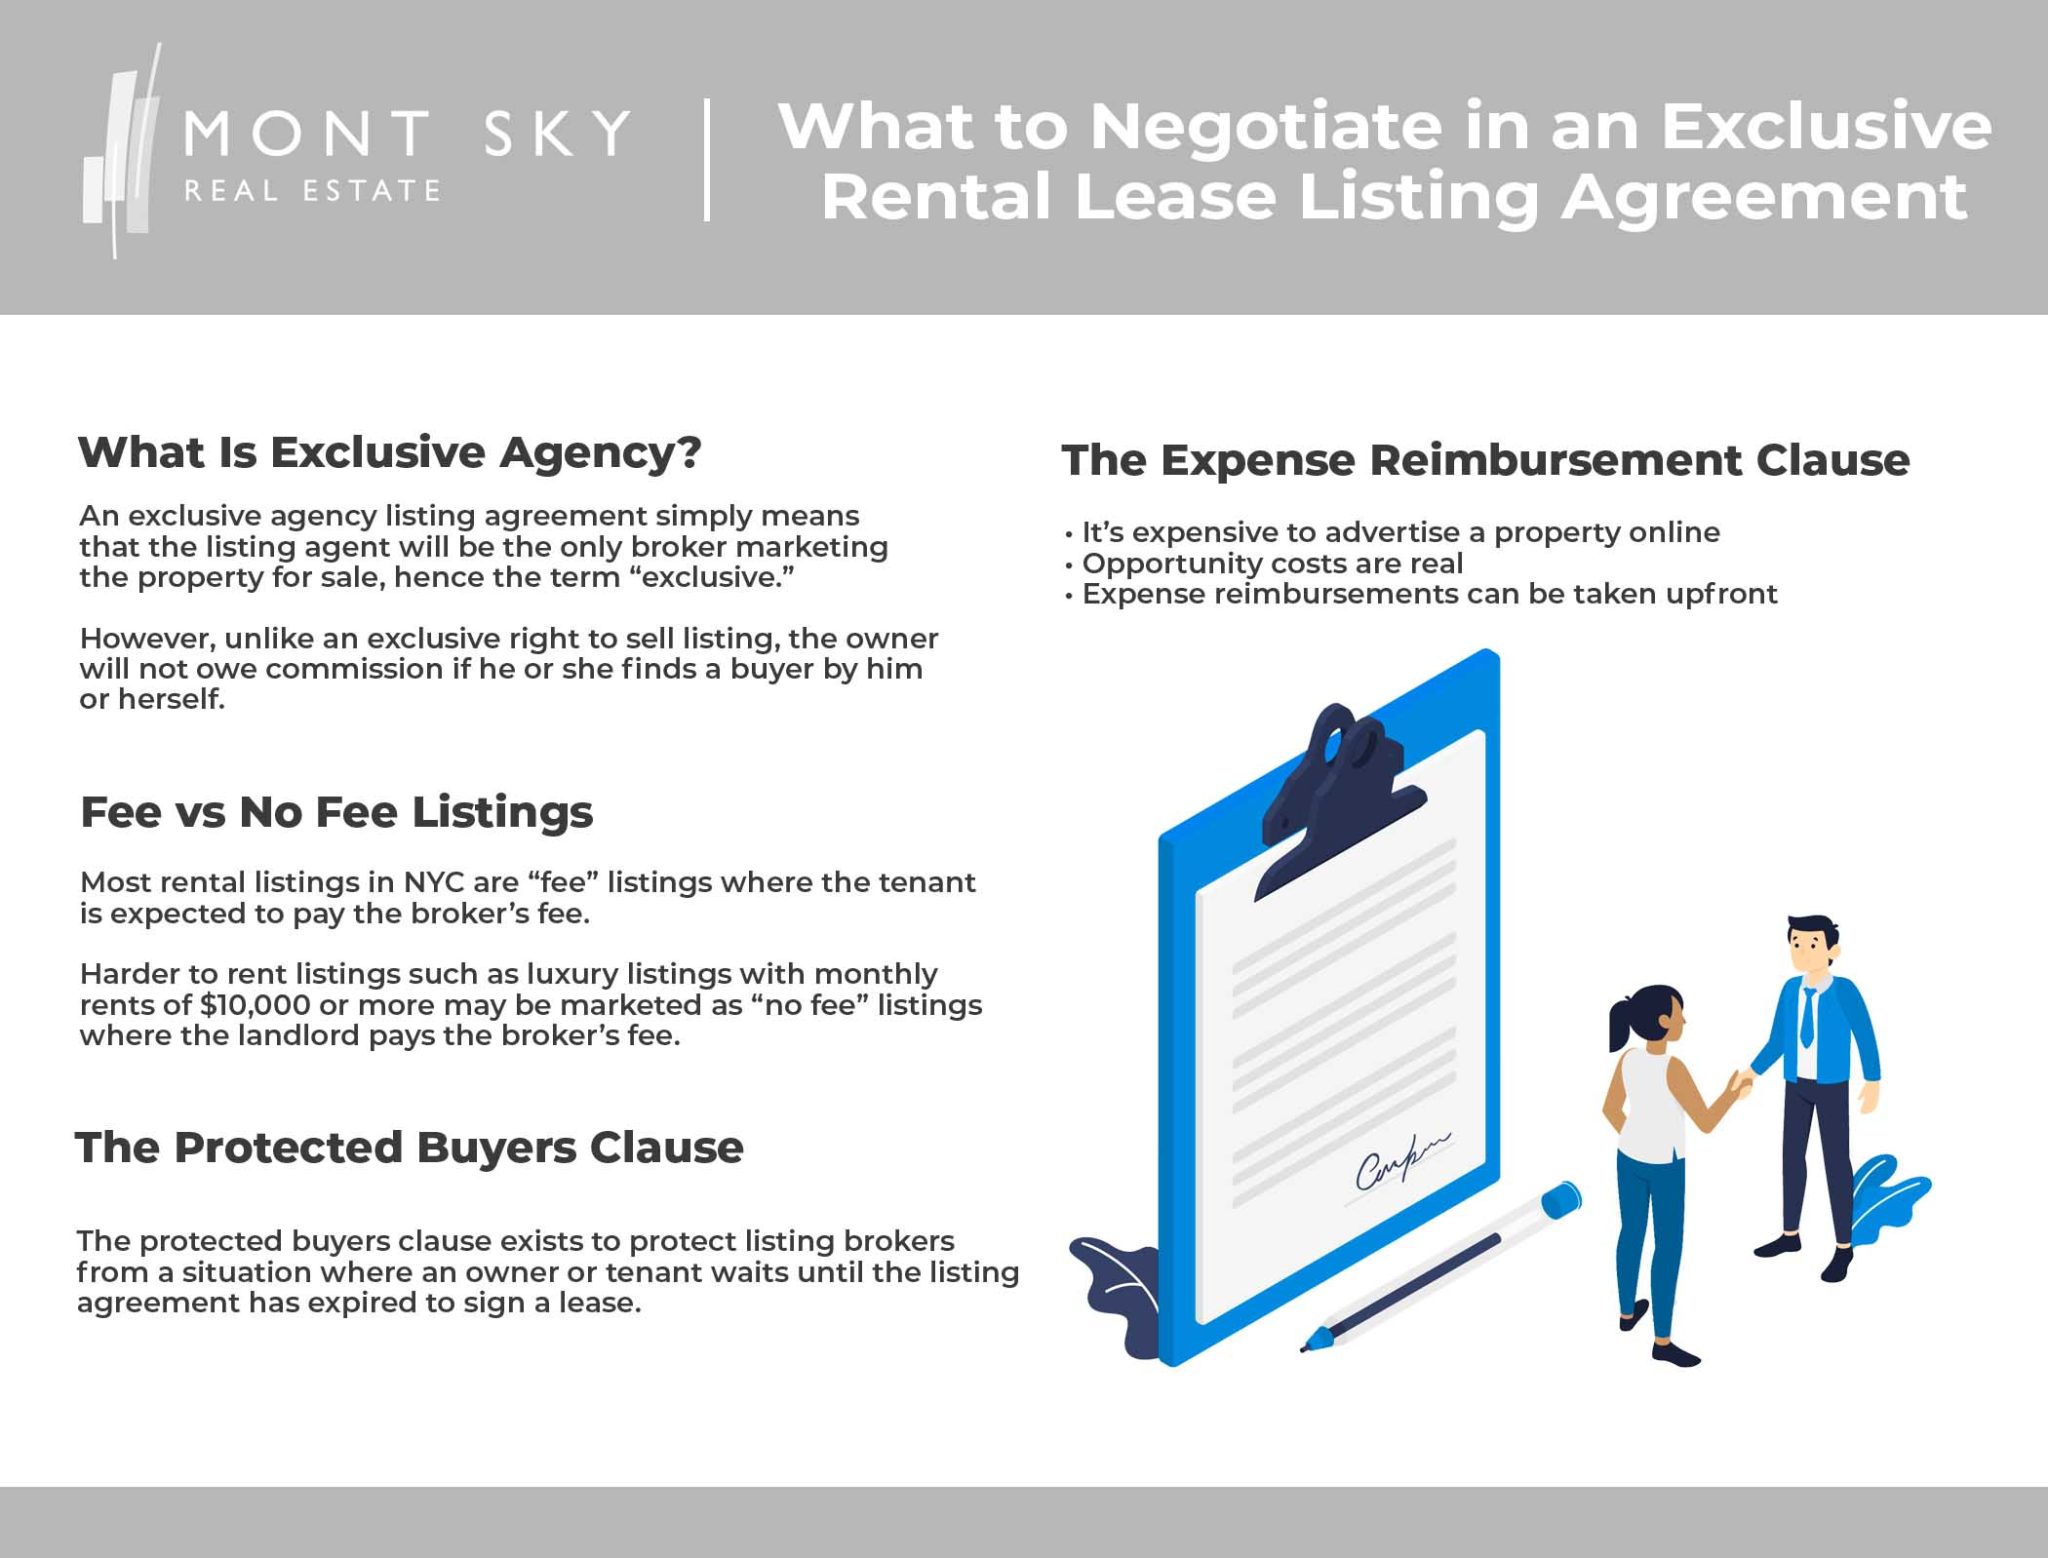 What to Negotiate in an Exclusive Rental Lease Listing Agreement